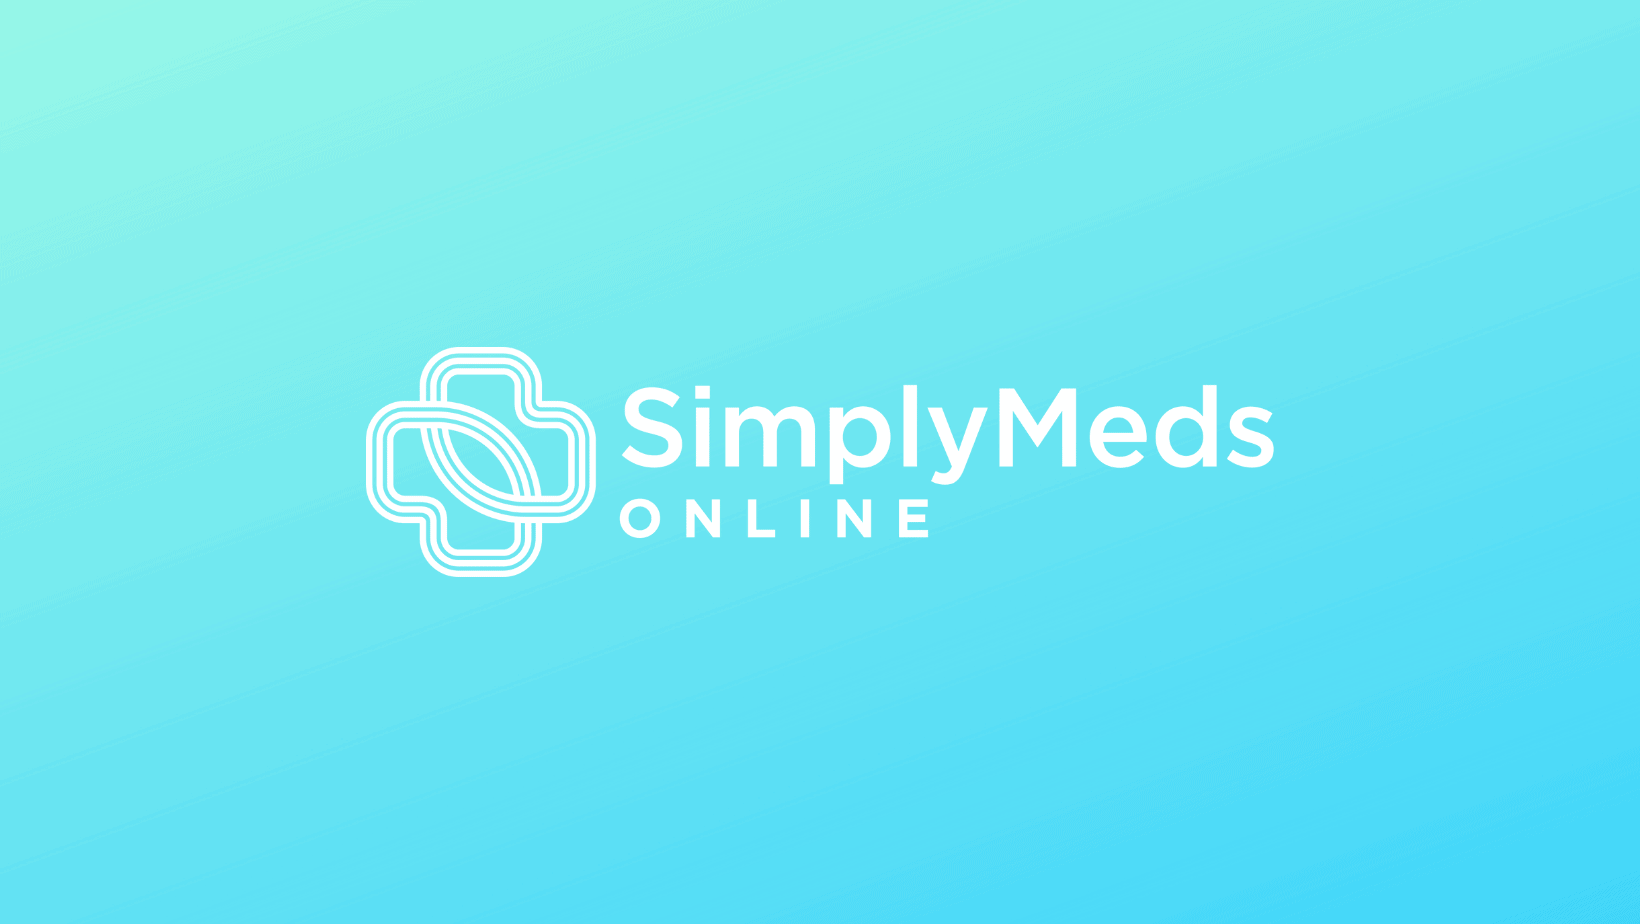 Simply Meds Online Discount Code